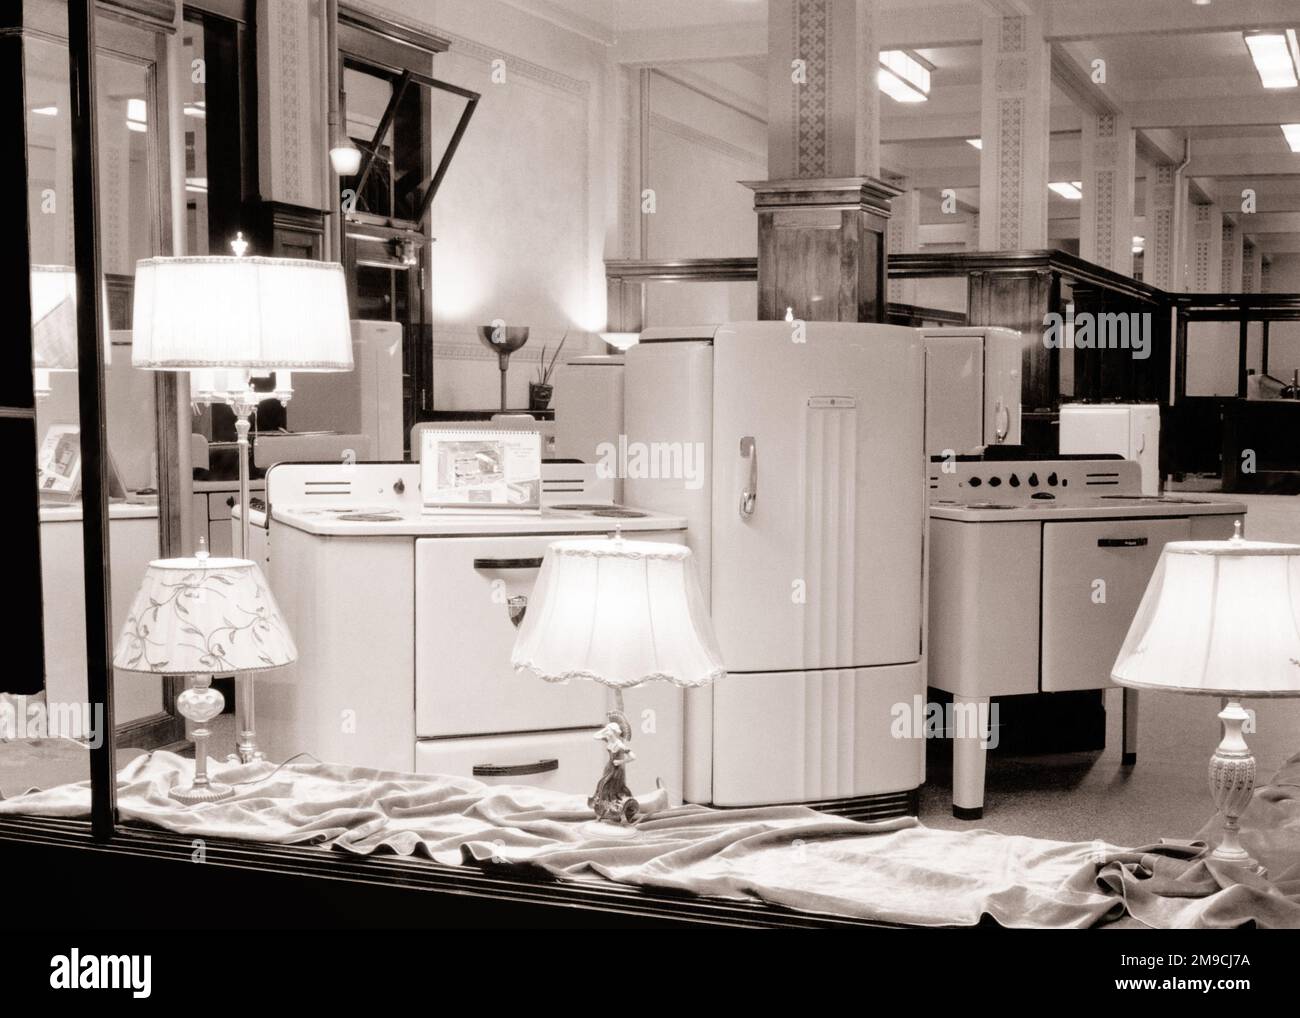 https://c8.alamy.com/comp/2M9CJ7A/1940s-display-in-window-of-kitchen-appliance-store-also-lamps-with-lampshades-butte-montana-usa-s7213-har001-hars-old-fashioned-2M9CJ7A.jpg